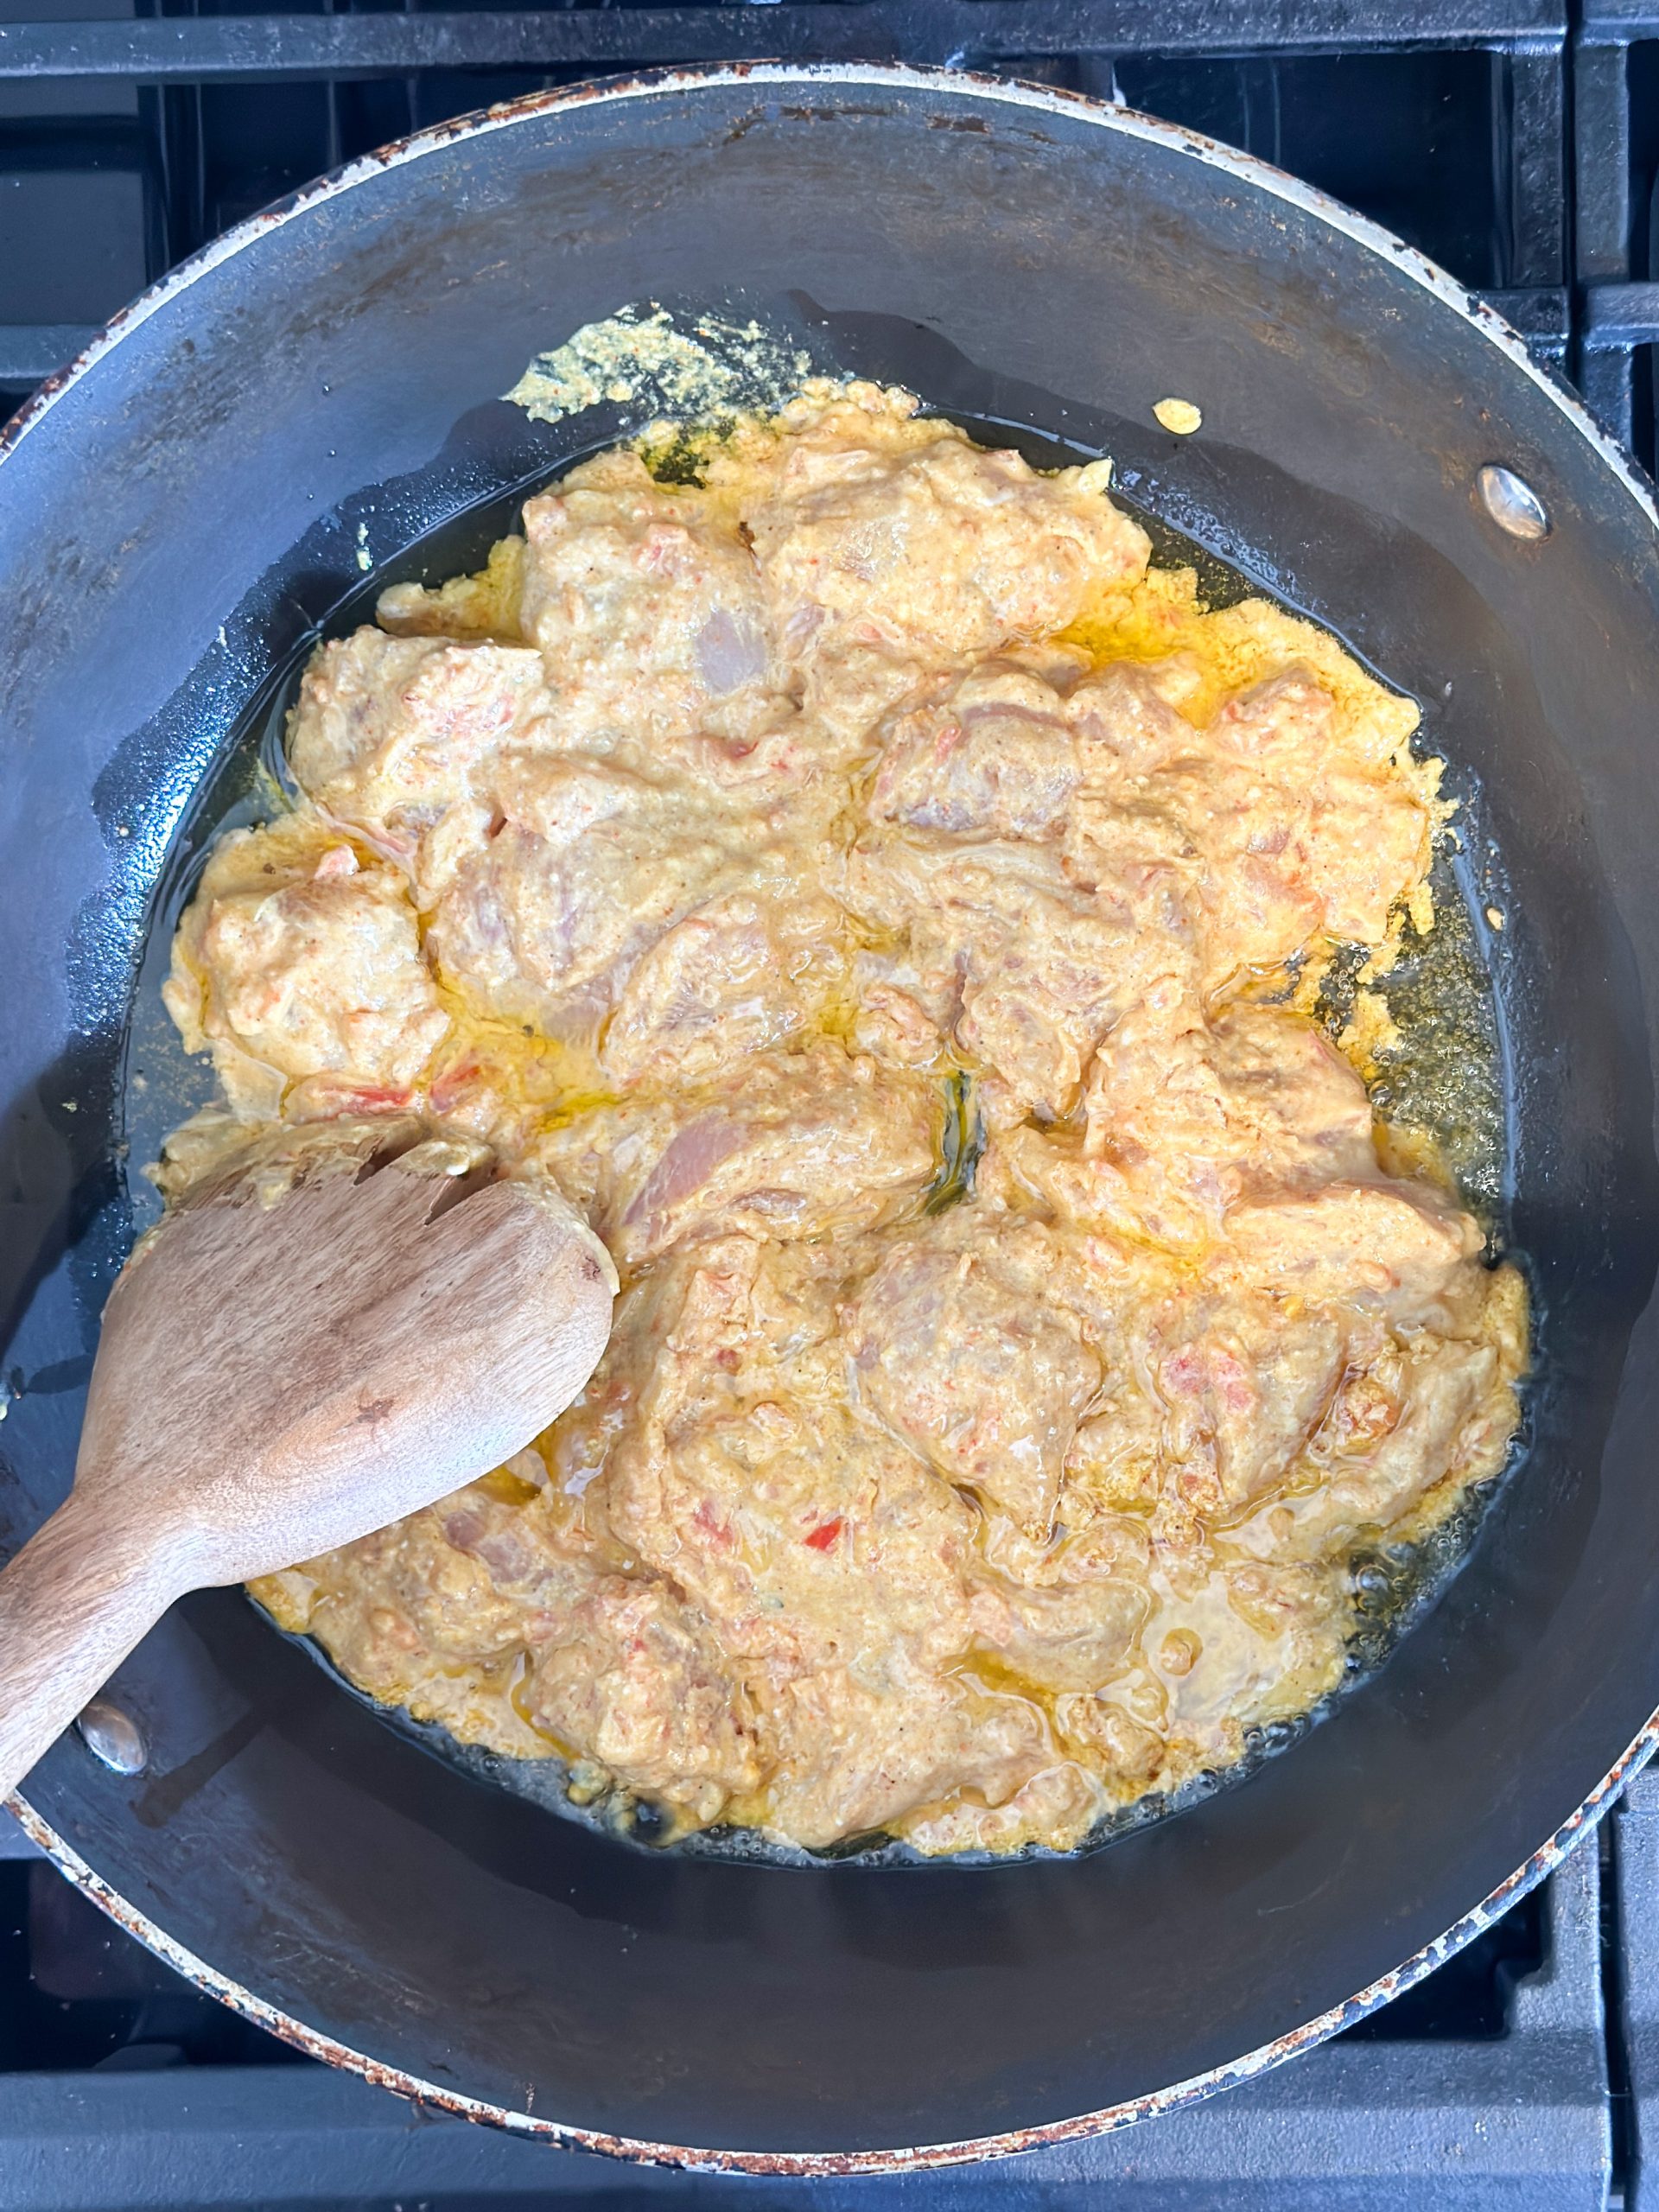 tandoori chicken being cooked in a wok with a wooden spoon mixing it